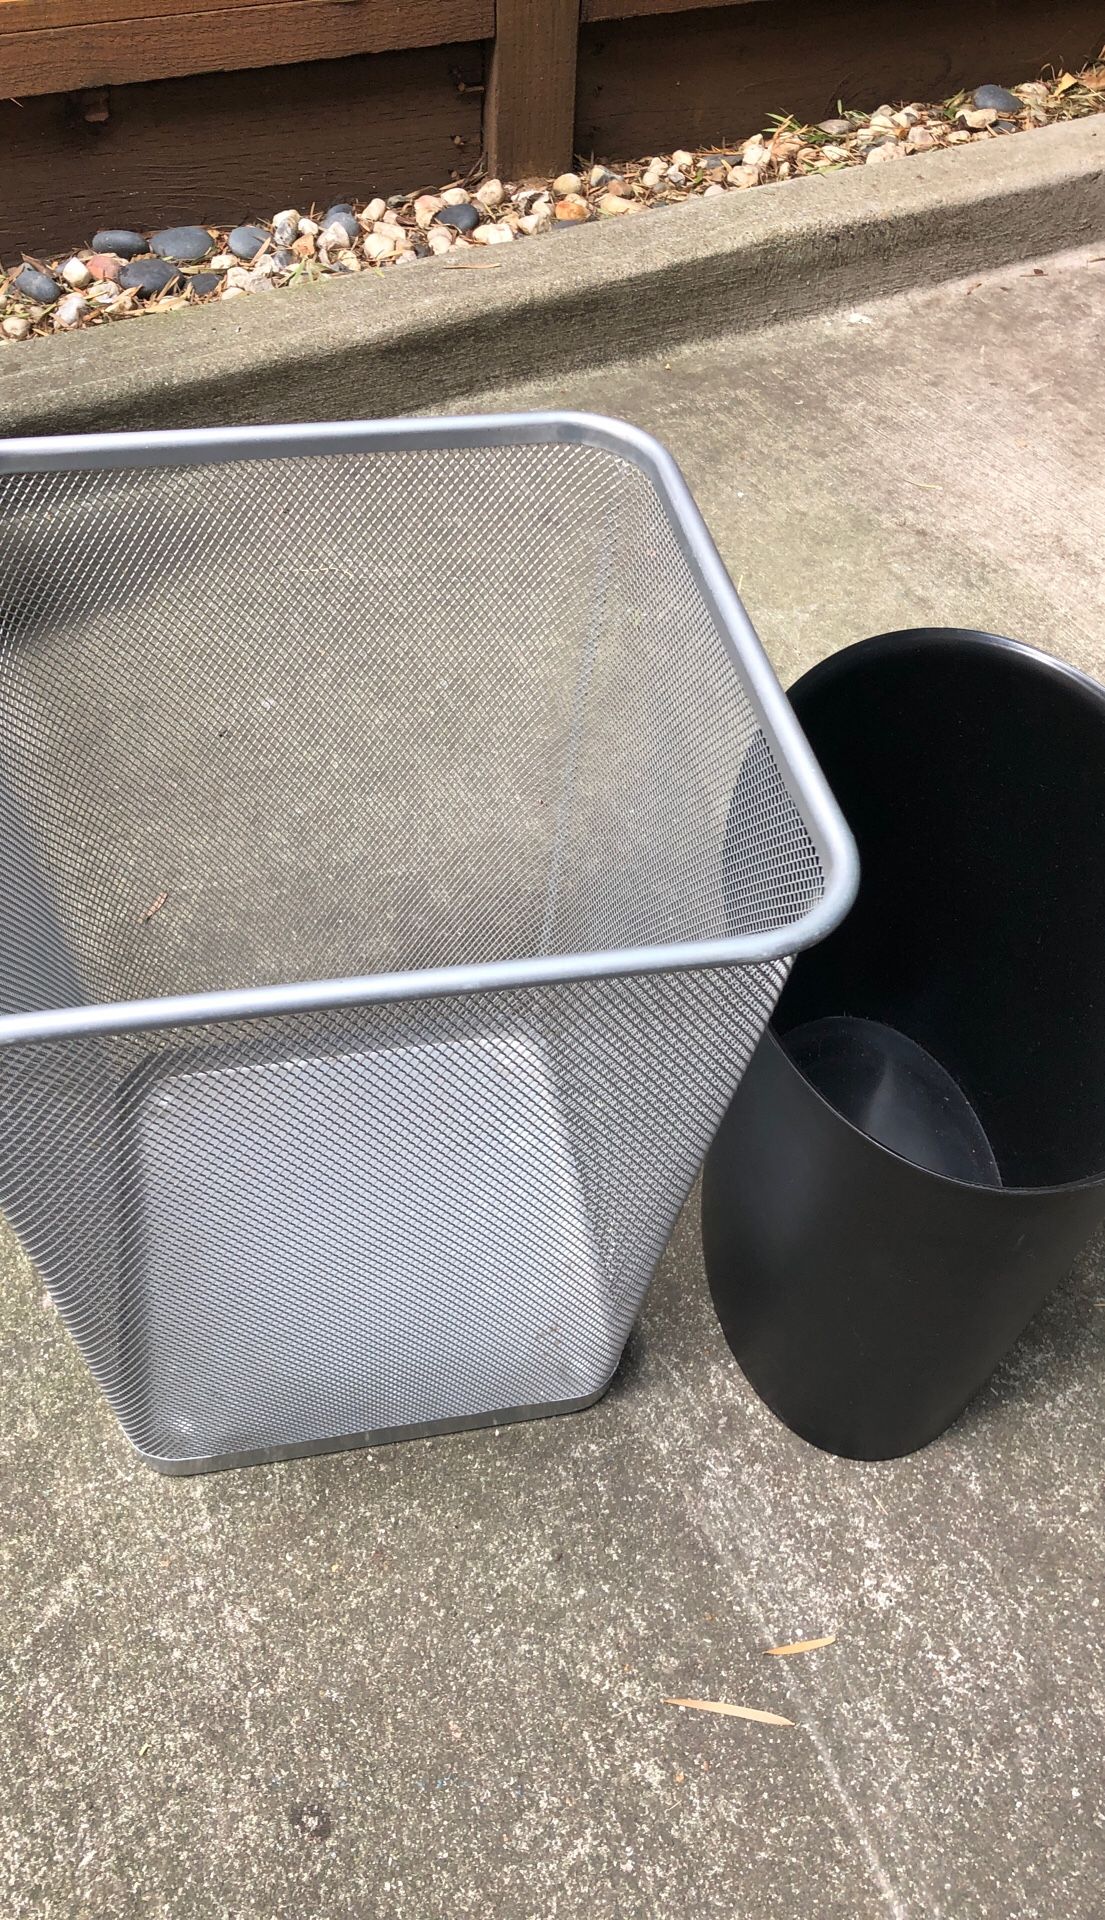 Free small garbage cans